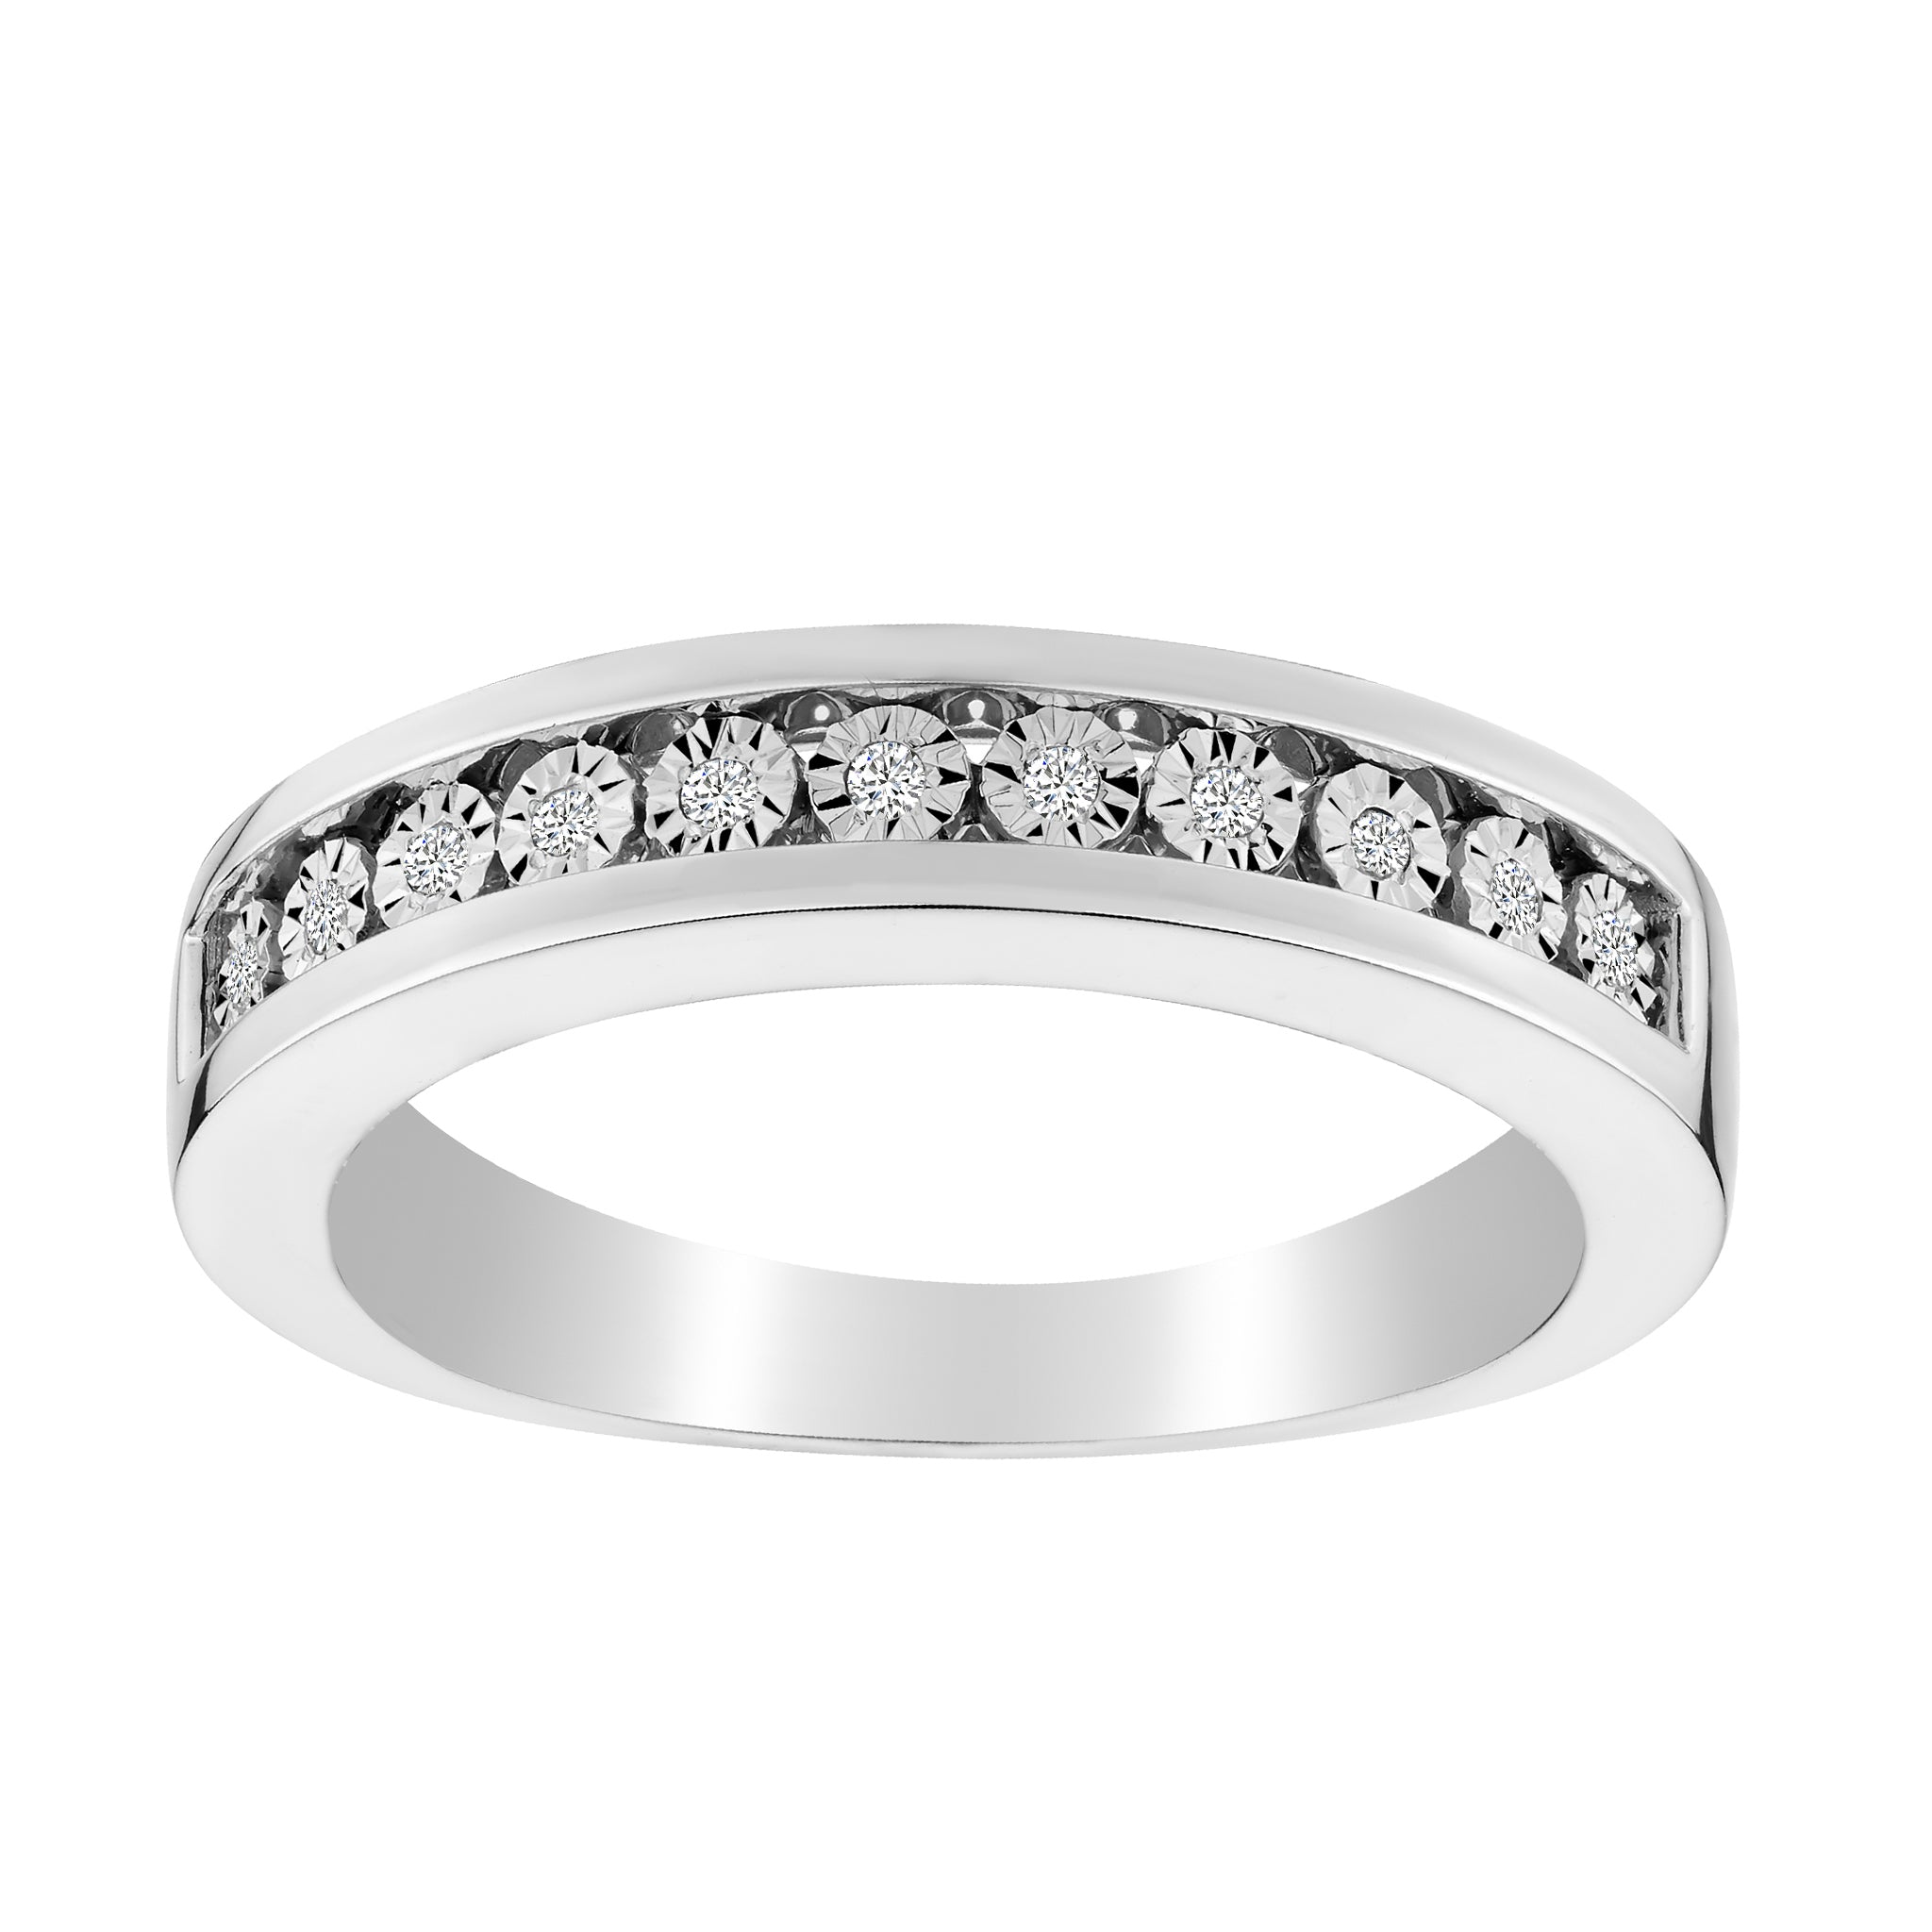 .10 Carat of Diamonds Band Ring, 10kt White Gold......................NOW